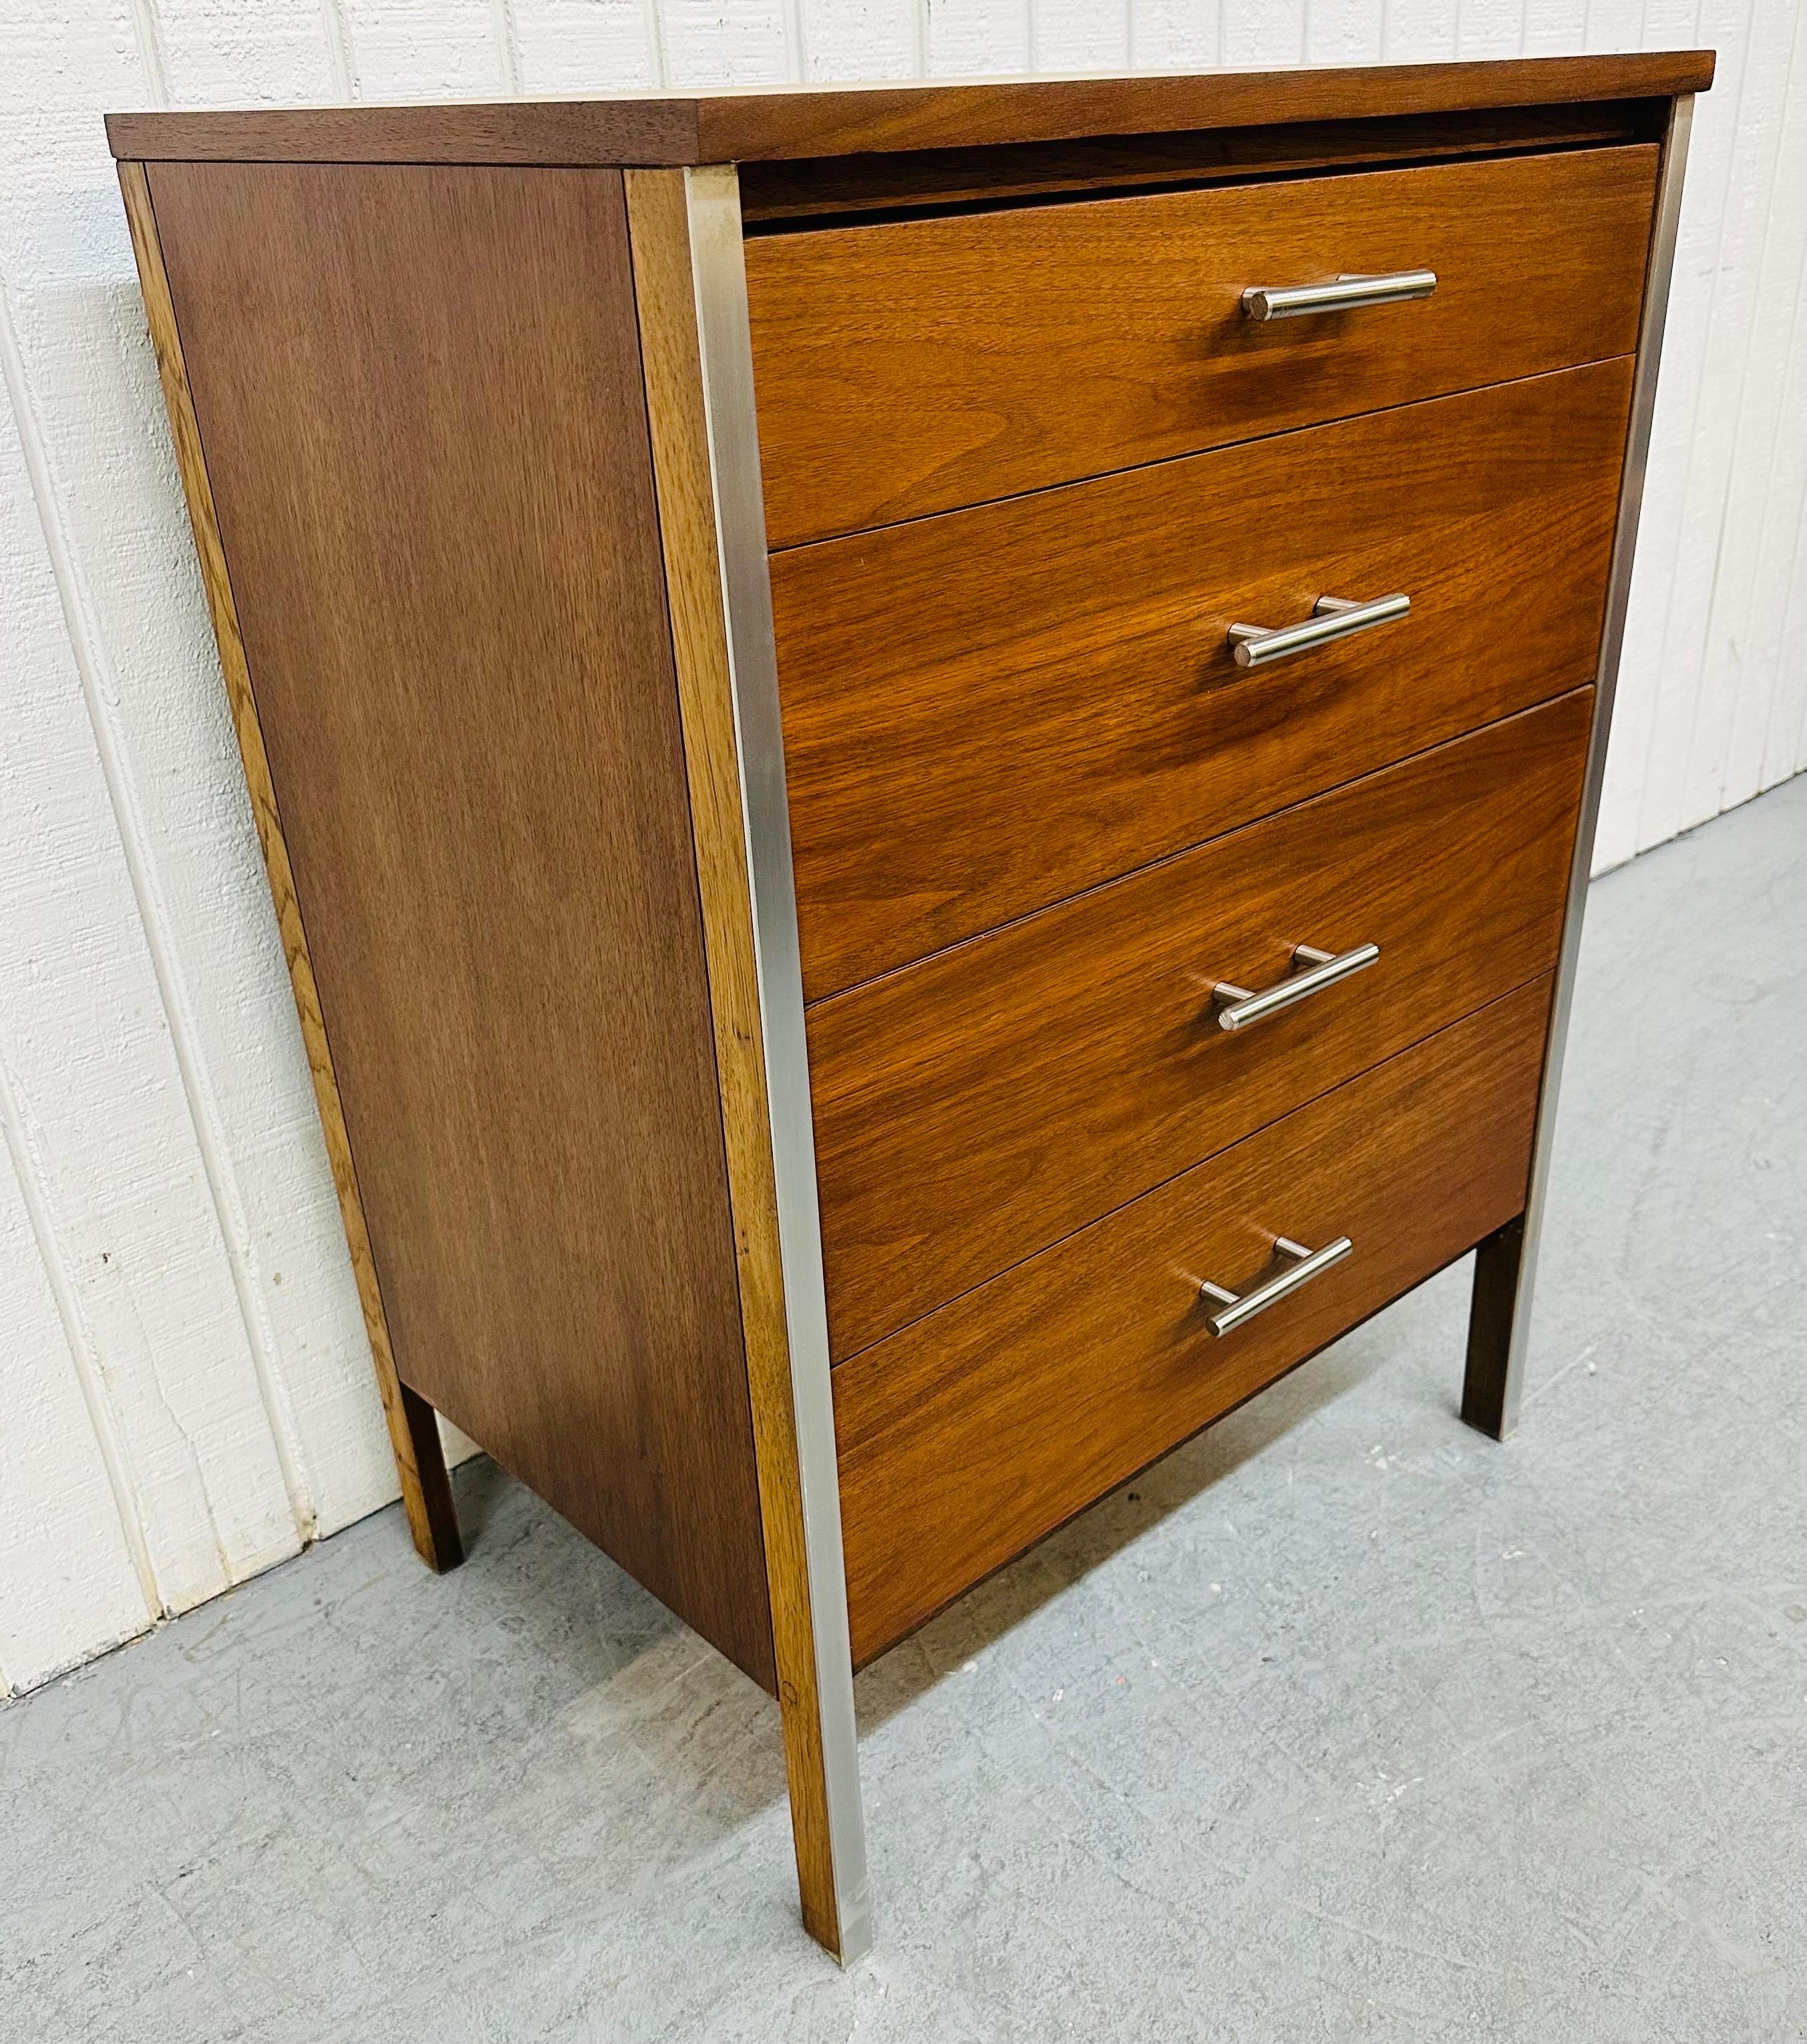 This listing is for a Mid-Century Modern Walnut 4-Drawer Chest. Featuring a rectangular design, four drawers for storage, new chrome pulls, and a beautiful walnut finish. This is an exceptional combination of quality and design attributed to Paul